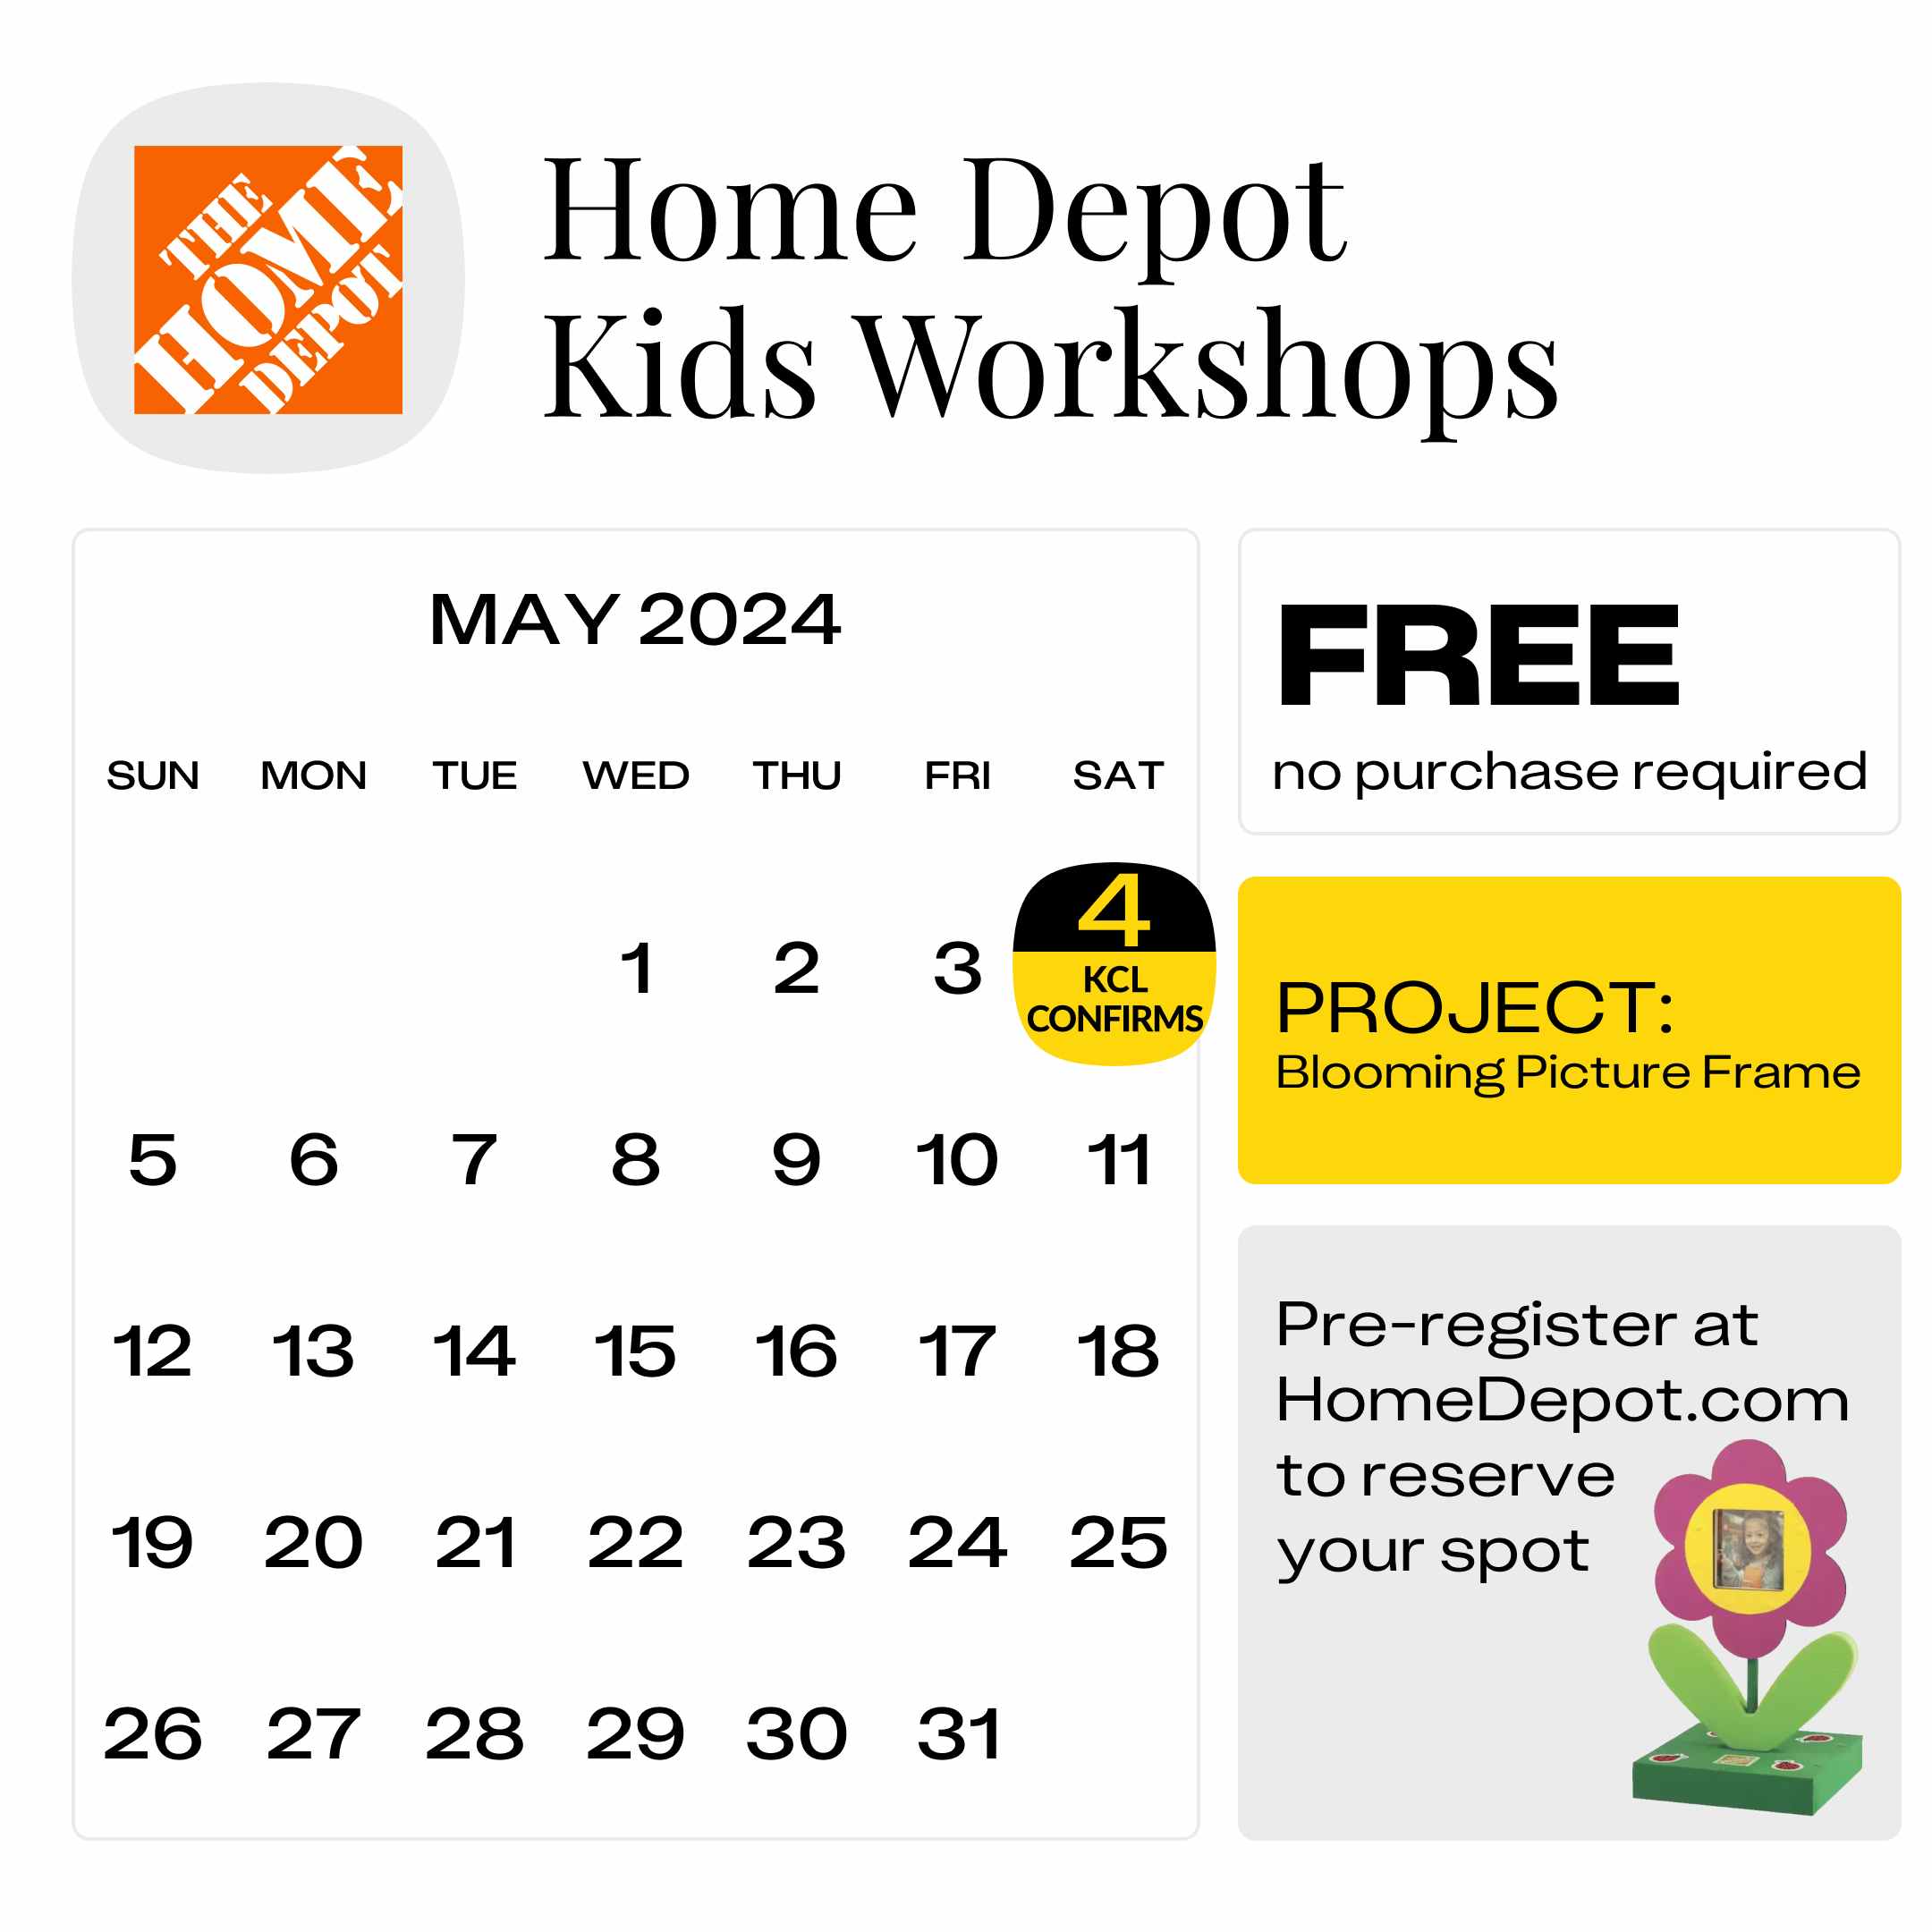 A calendar graphic showing the next Home Depot Kids' Workshop and date on May 4, 2024